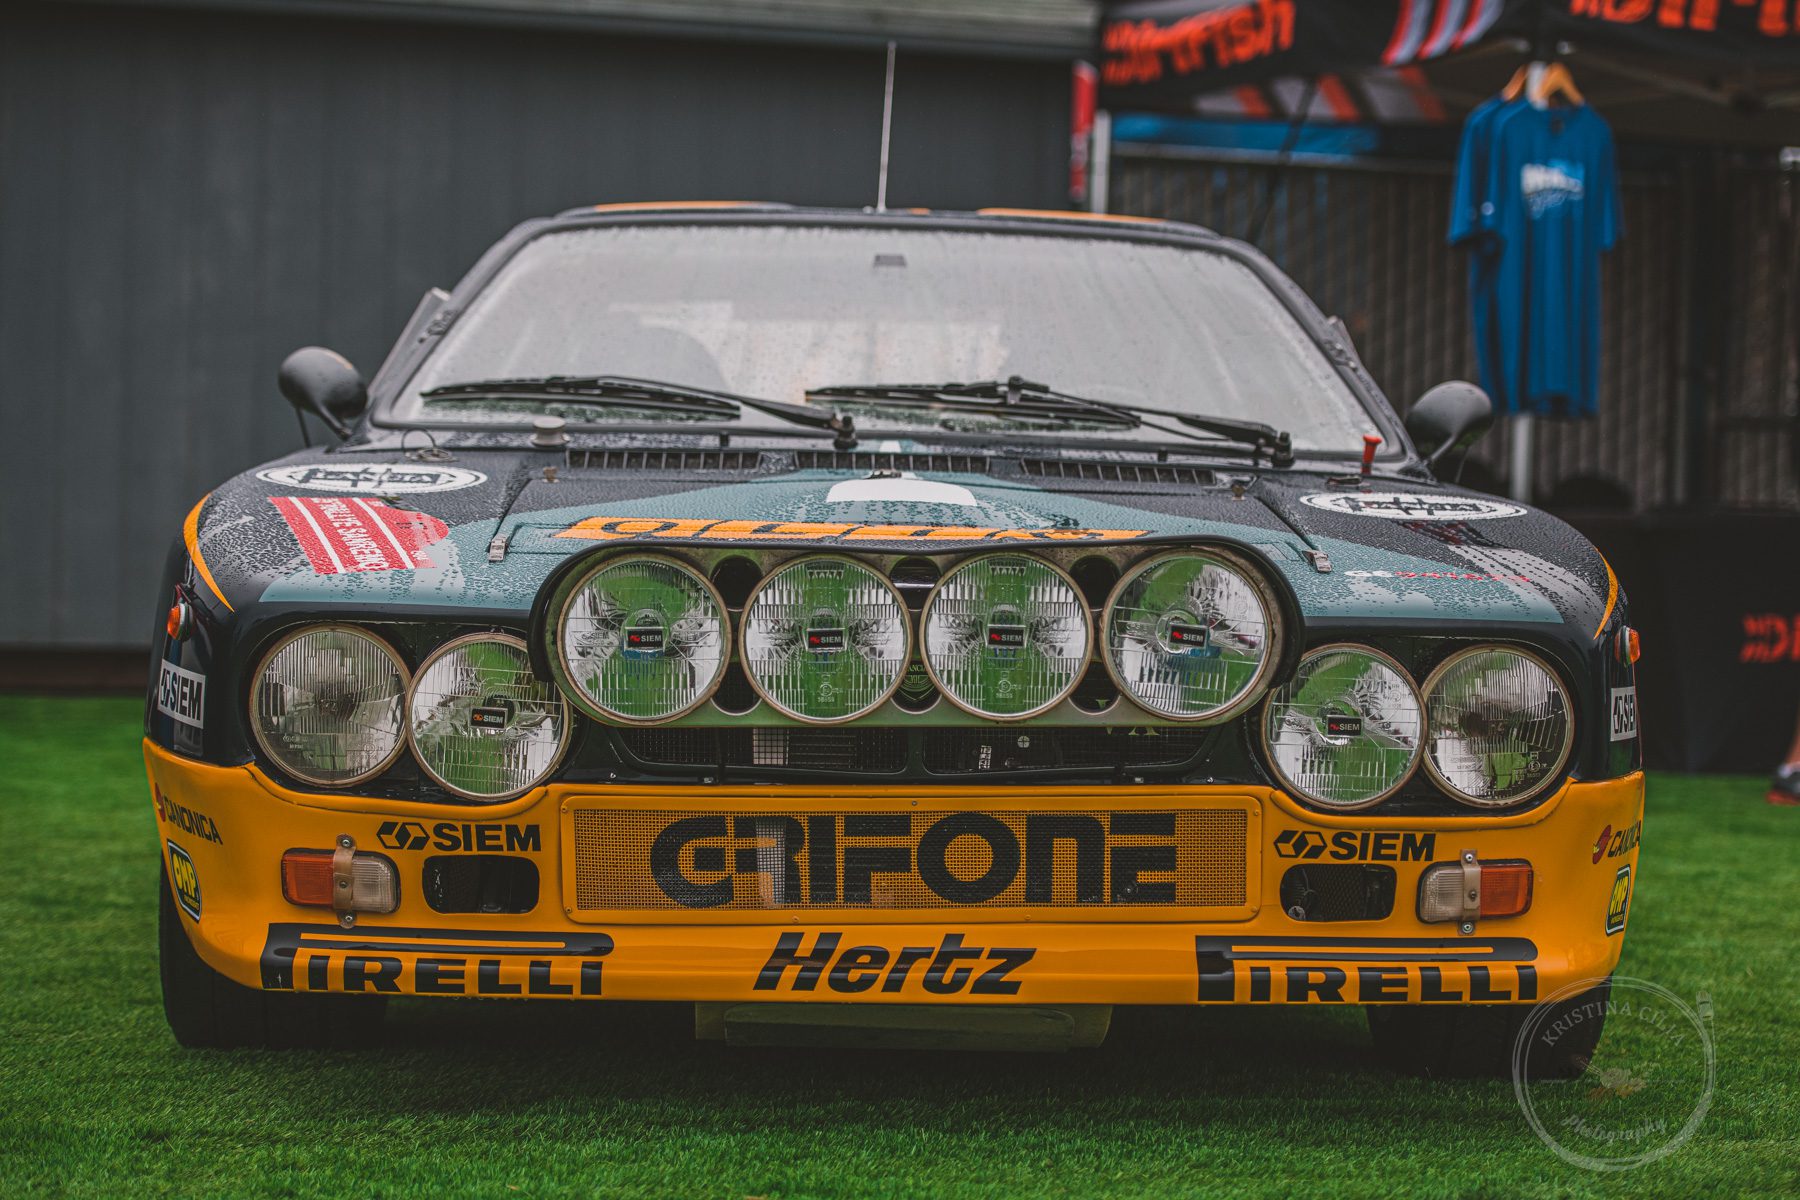 Driving lights adorn the front hood of the Lancia Rally #037.